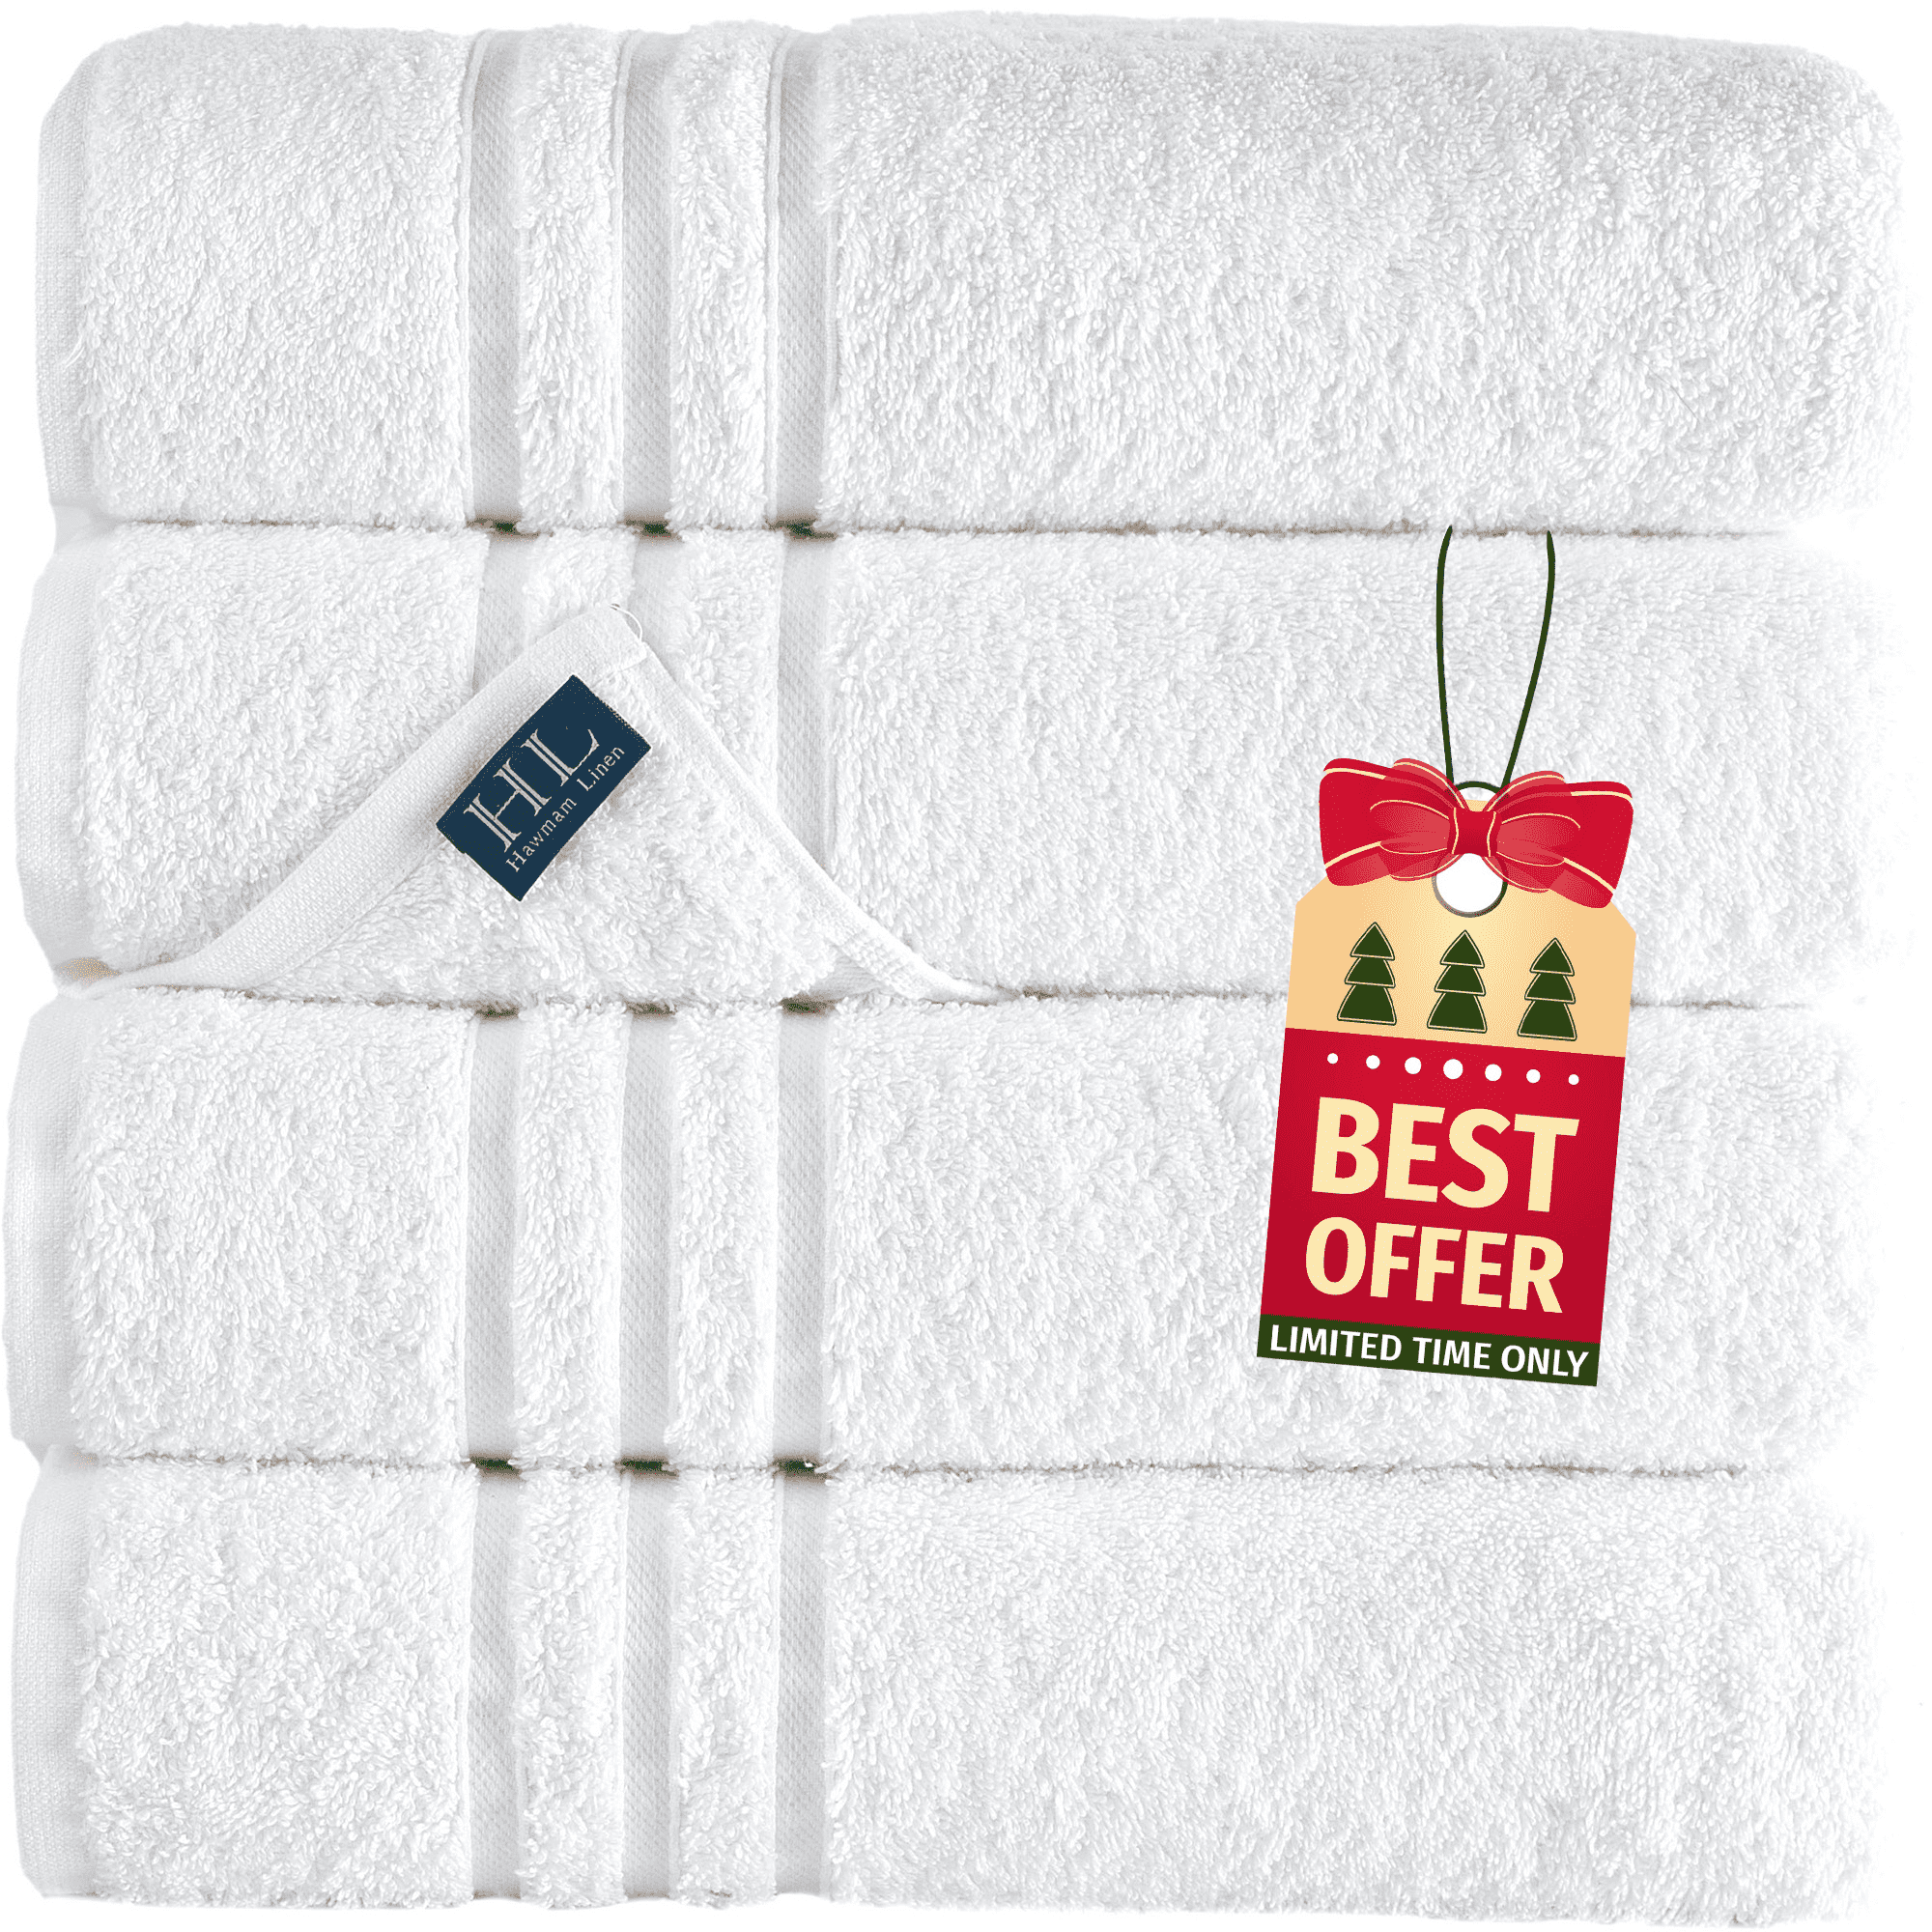 Hammam Linen 4 Piece Bath Towels Set - White - Perfect for Daily Use